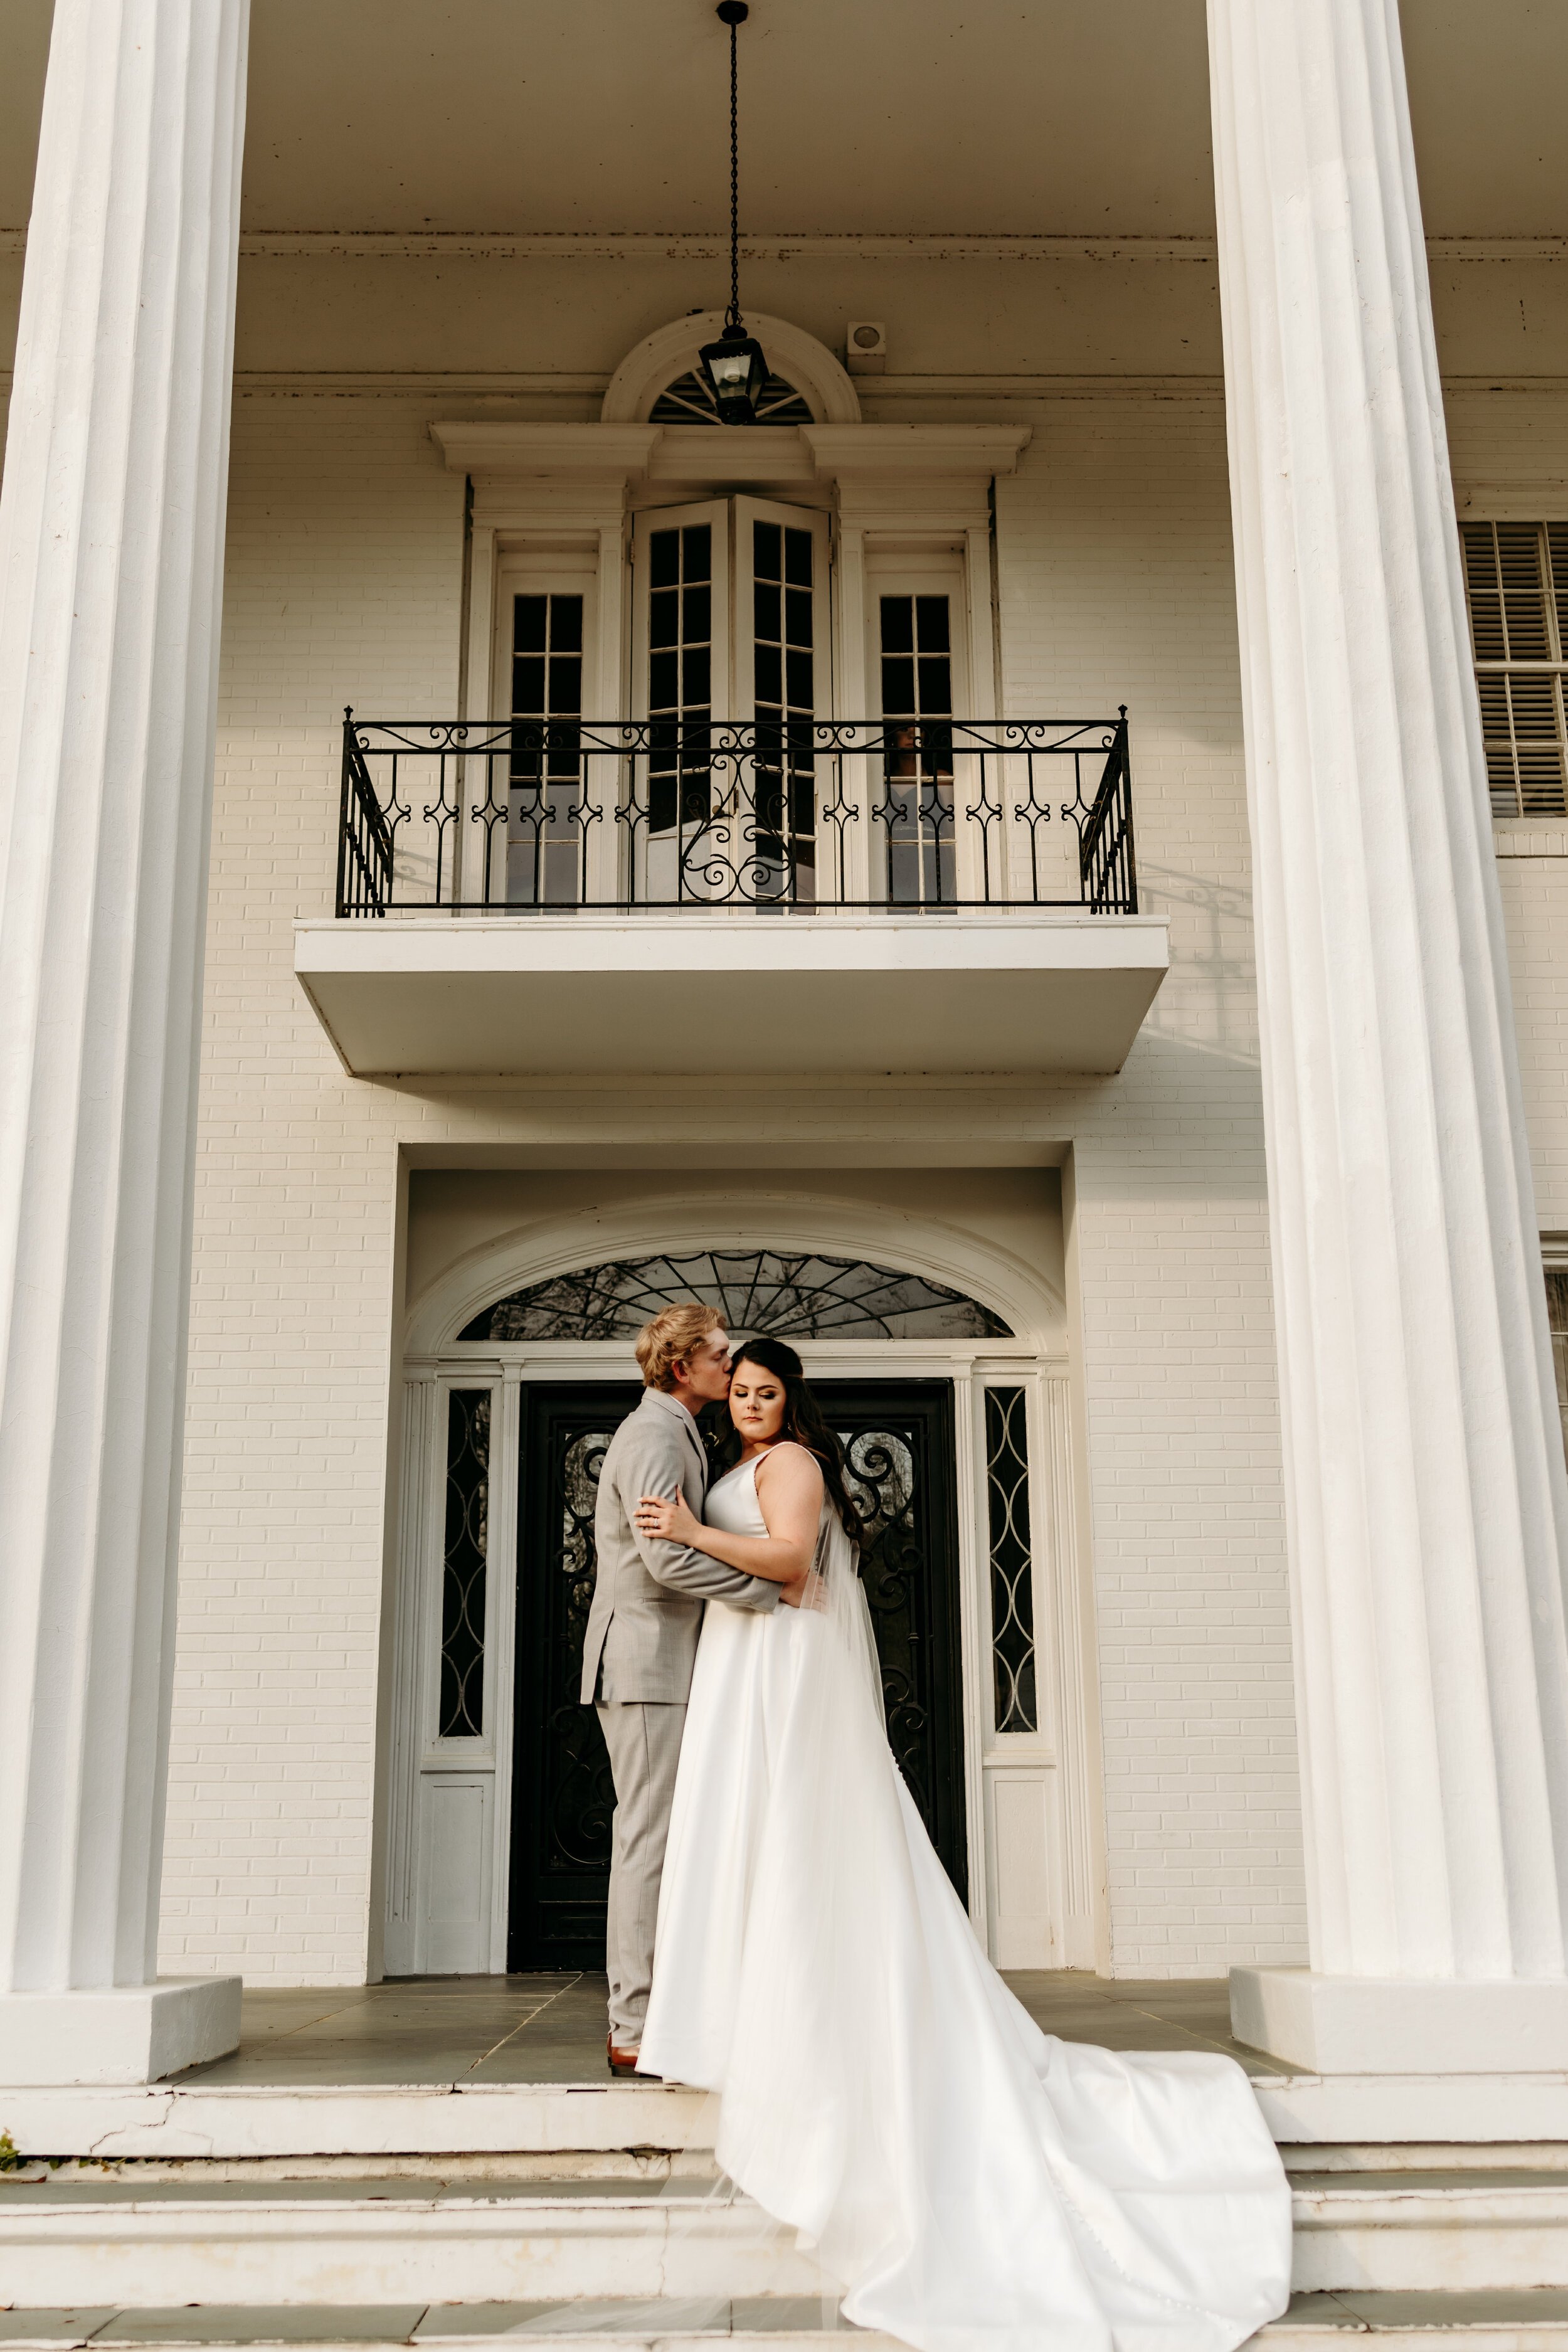 ivory-and-beau-bride-taylor-down-for-the-gown-blog-bridal-blog-wedding-blog-real-bride-maggie-sottero-wedding-dress-satin-ball-gown-bridal-gown-wedding-gown-beiber + shearouse wedding-2700.jpg